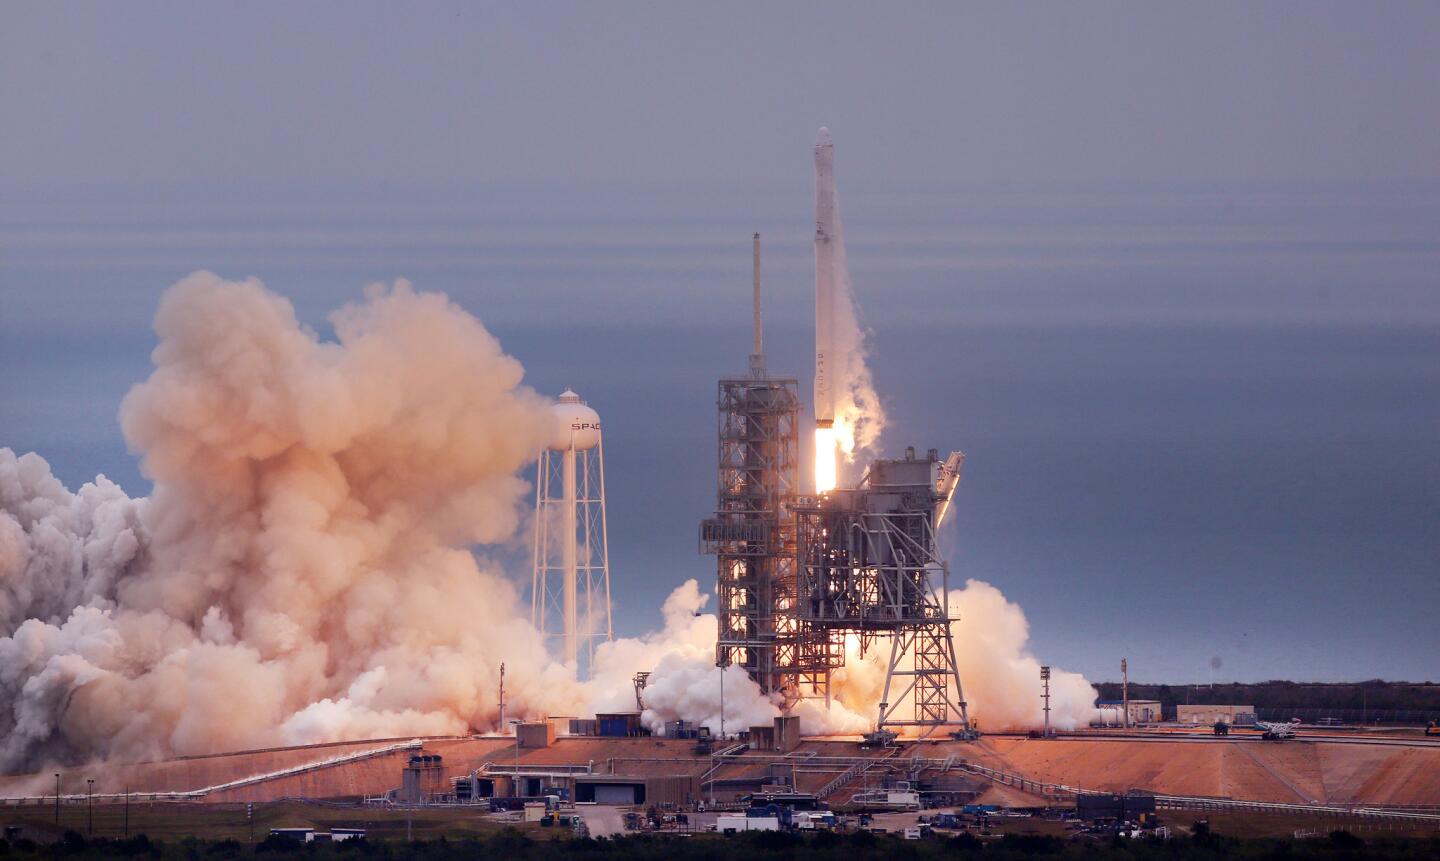 A SpaceX Falcon9 rocket blasts off Sunday, Feb. 19, 2017 from the Kennedy Space Center. Pad39A was the launch site of a rocket that carried the first U.S. astronauts to the moon. It was also the site of the last Space Shuttle mission in 2011.